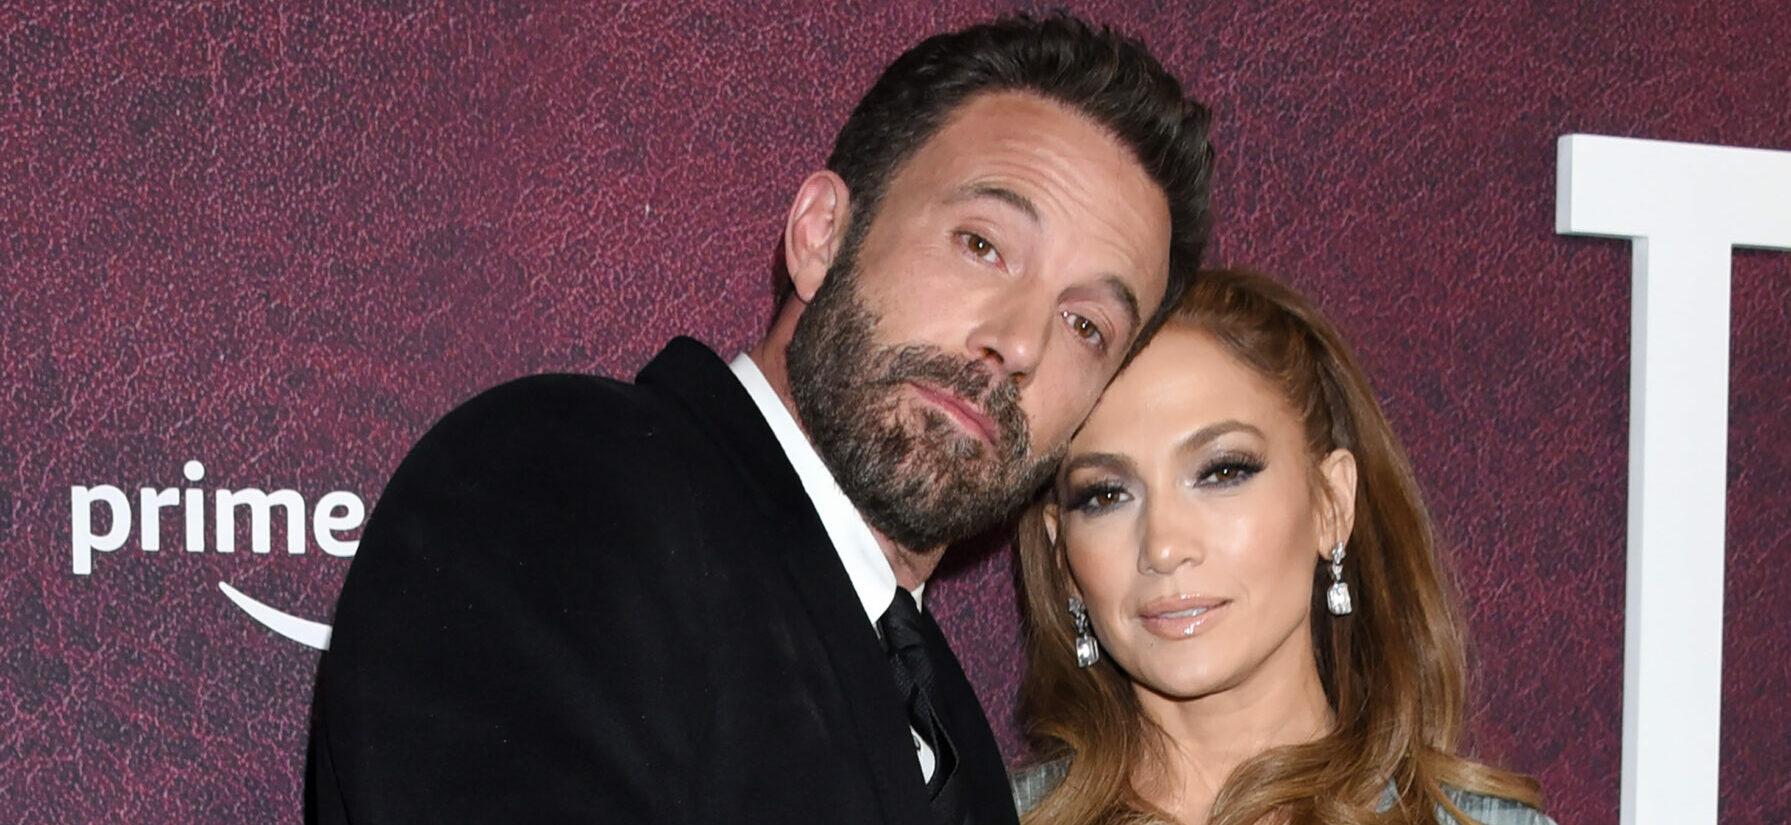 How Ben Affleck’s New Subtle Tattoo With J. Lo Compares To His Past Controversial Inkings